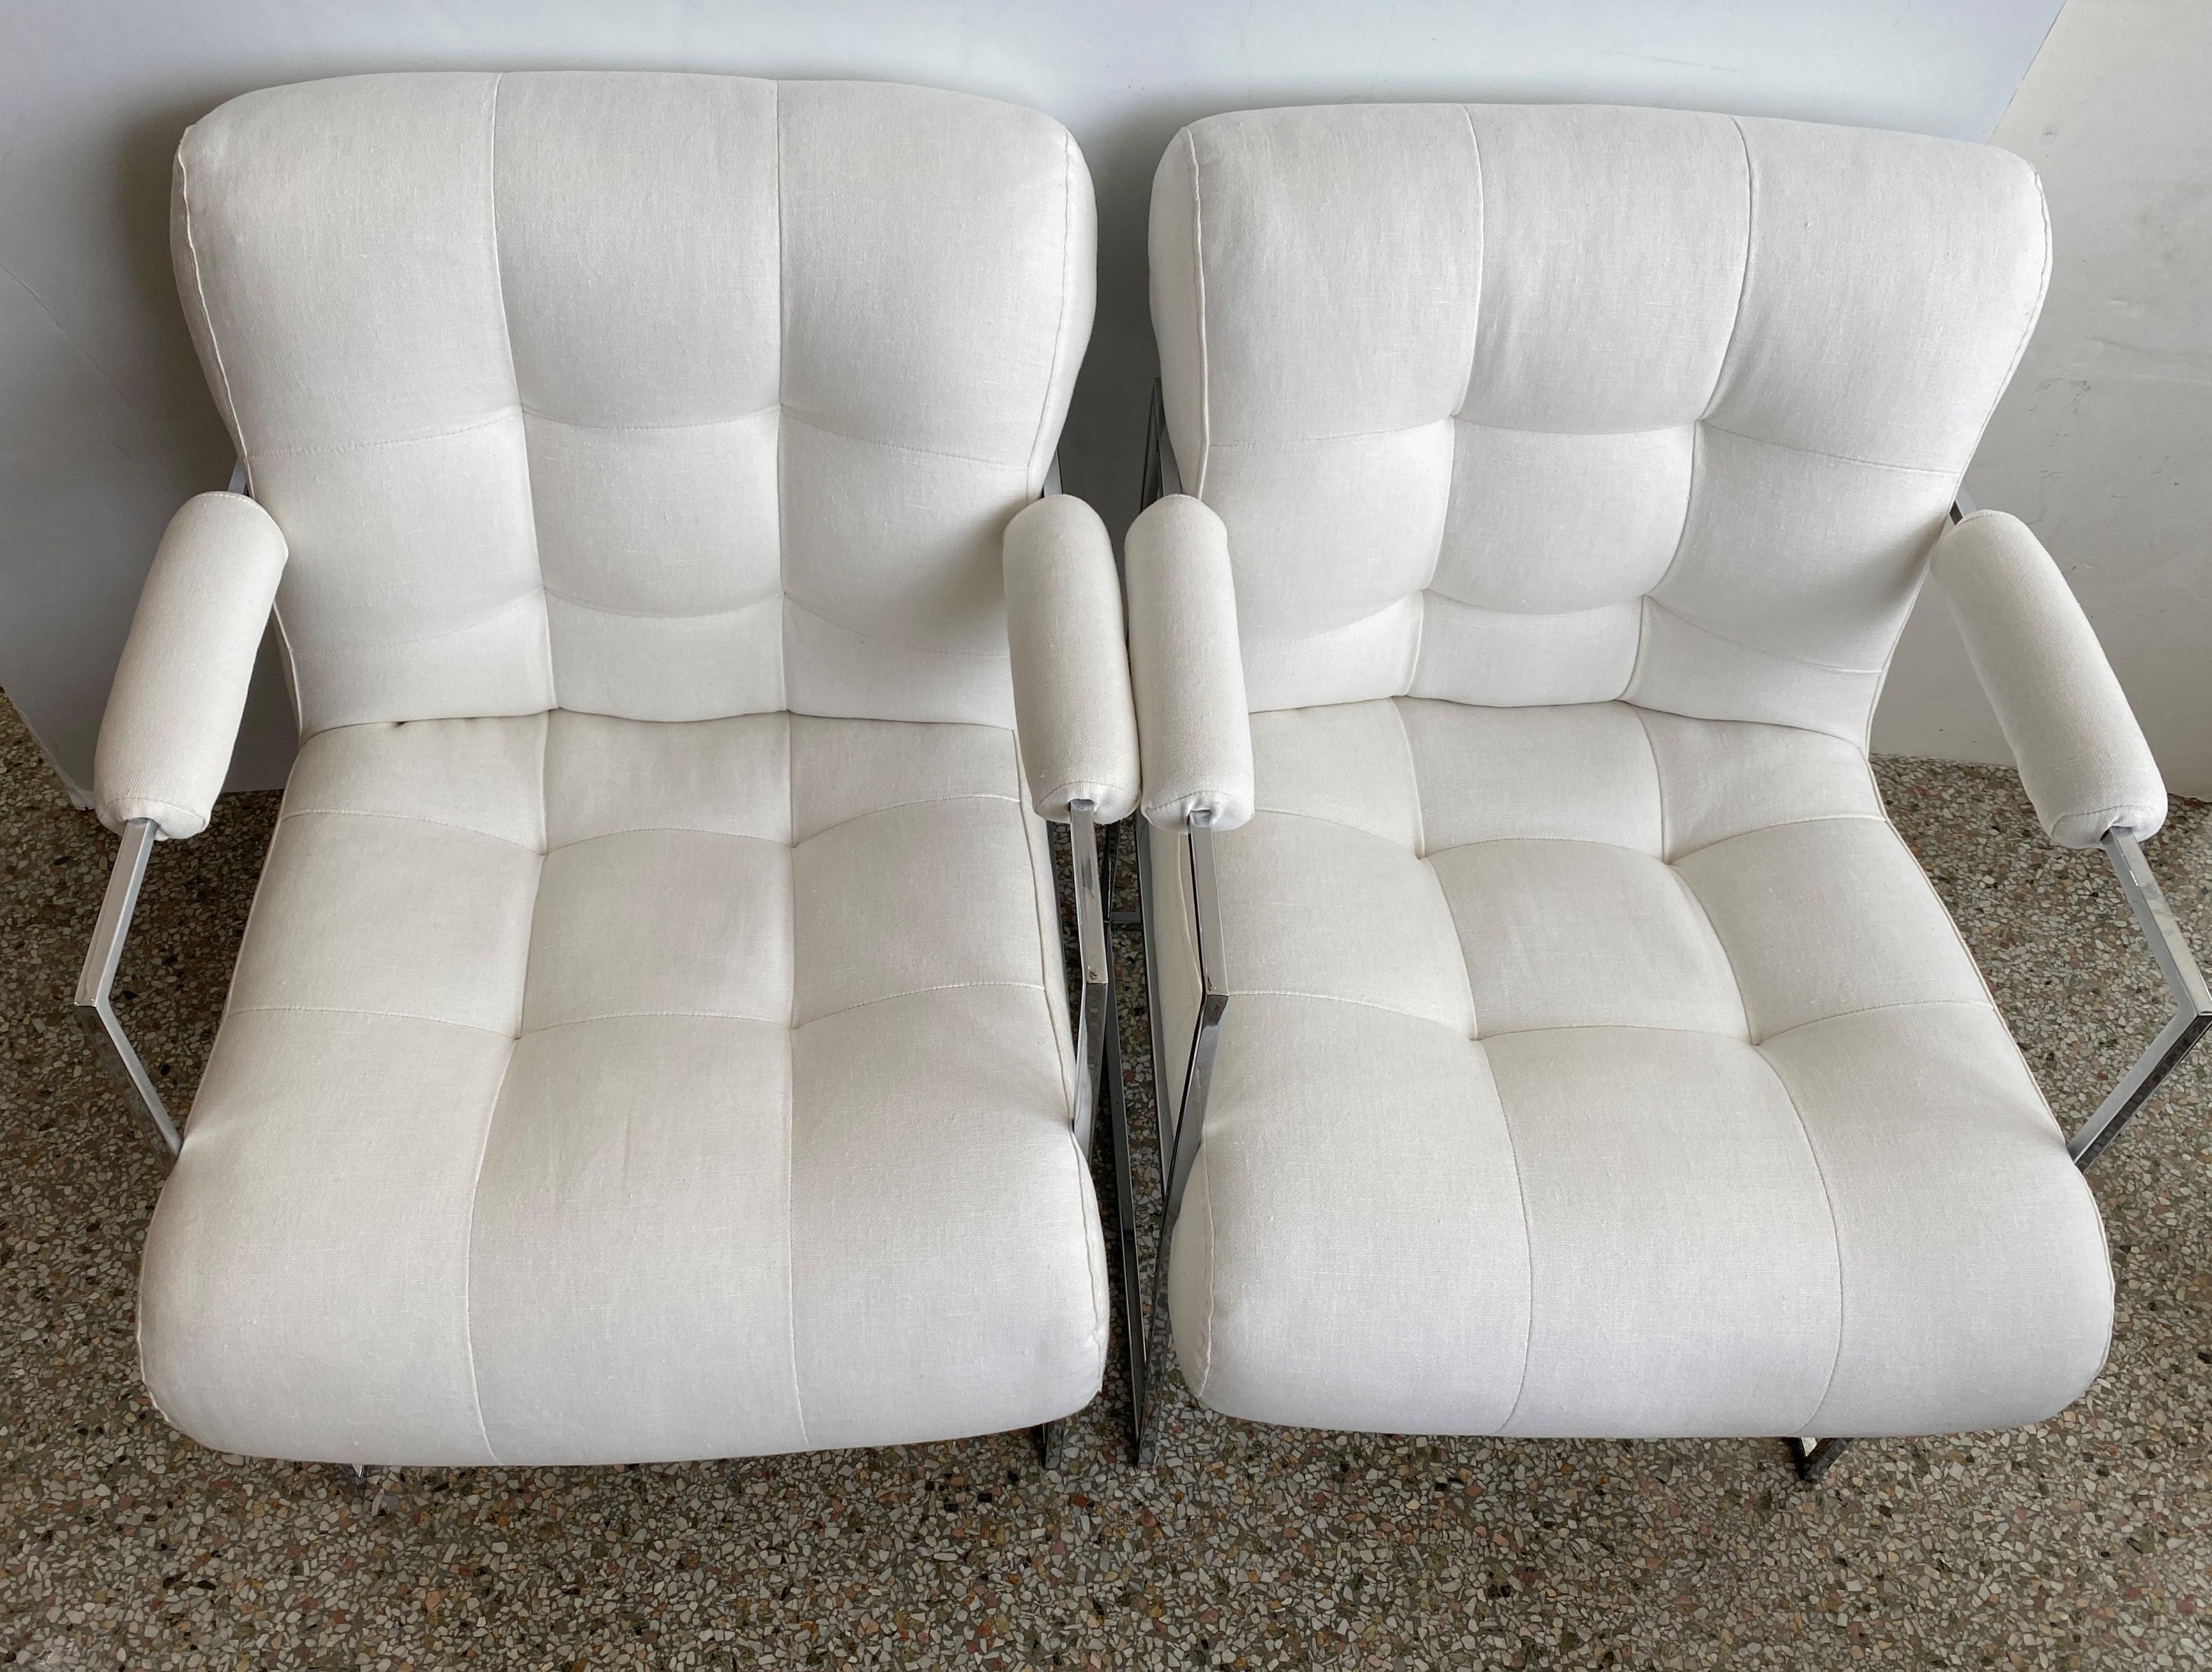 Pair of Milo Baughman Thin Line Chairs in Polished Chrome In Good Condition For Sale In West Palm Beach, FL